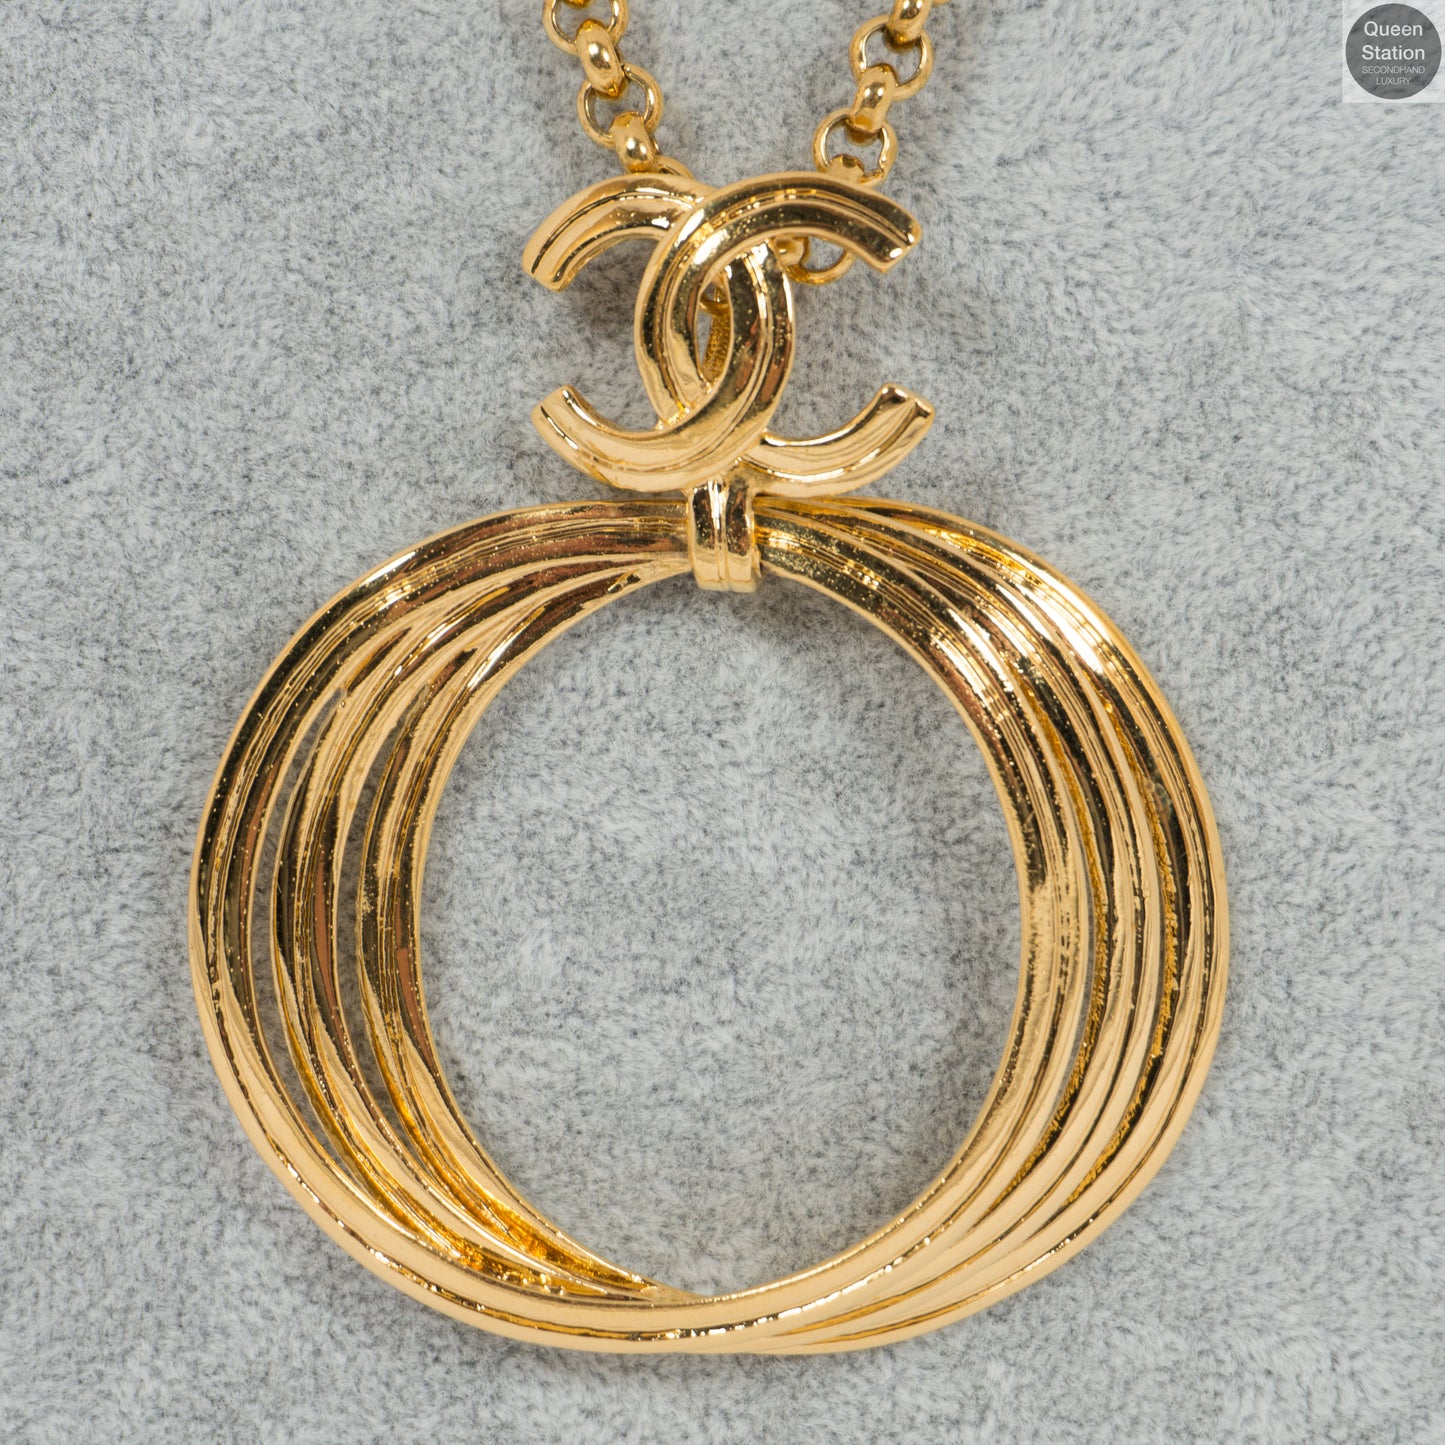 Long CC Ring Necklace